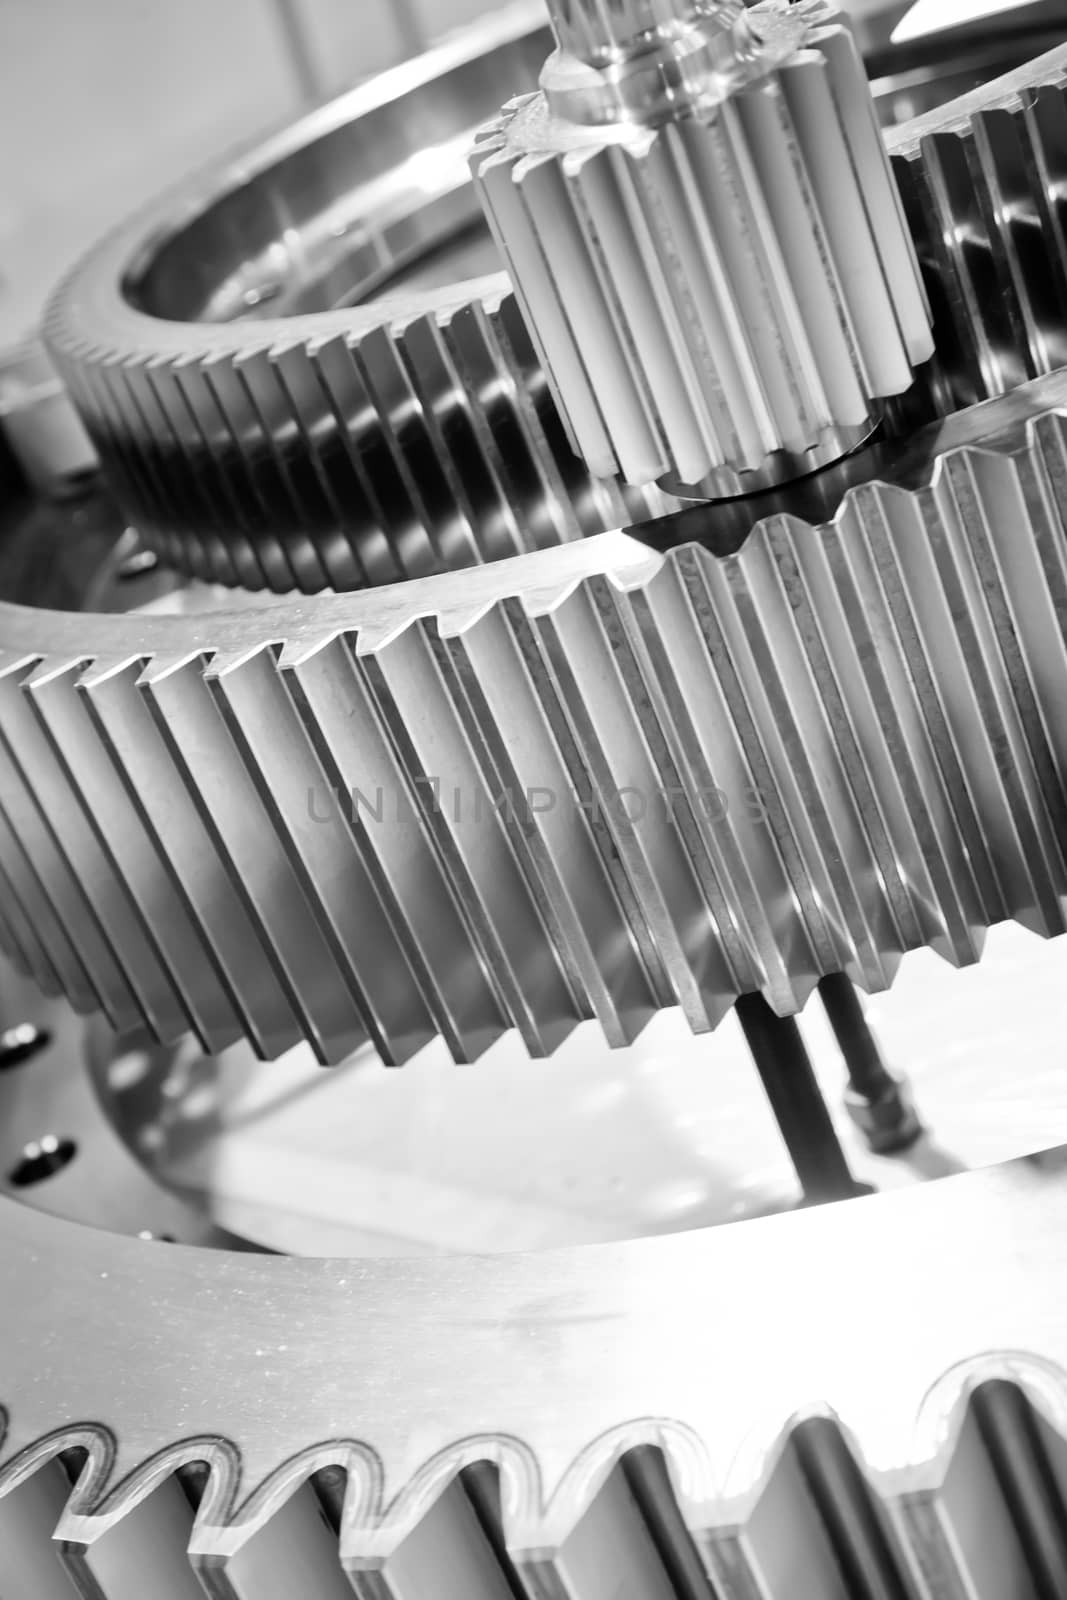 gears, nuts and bolts, great technology background or texture, BW photo with shallow DOF